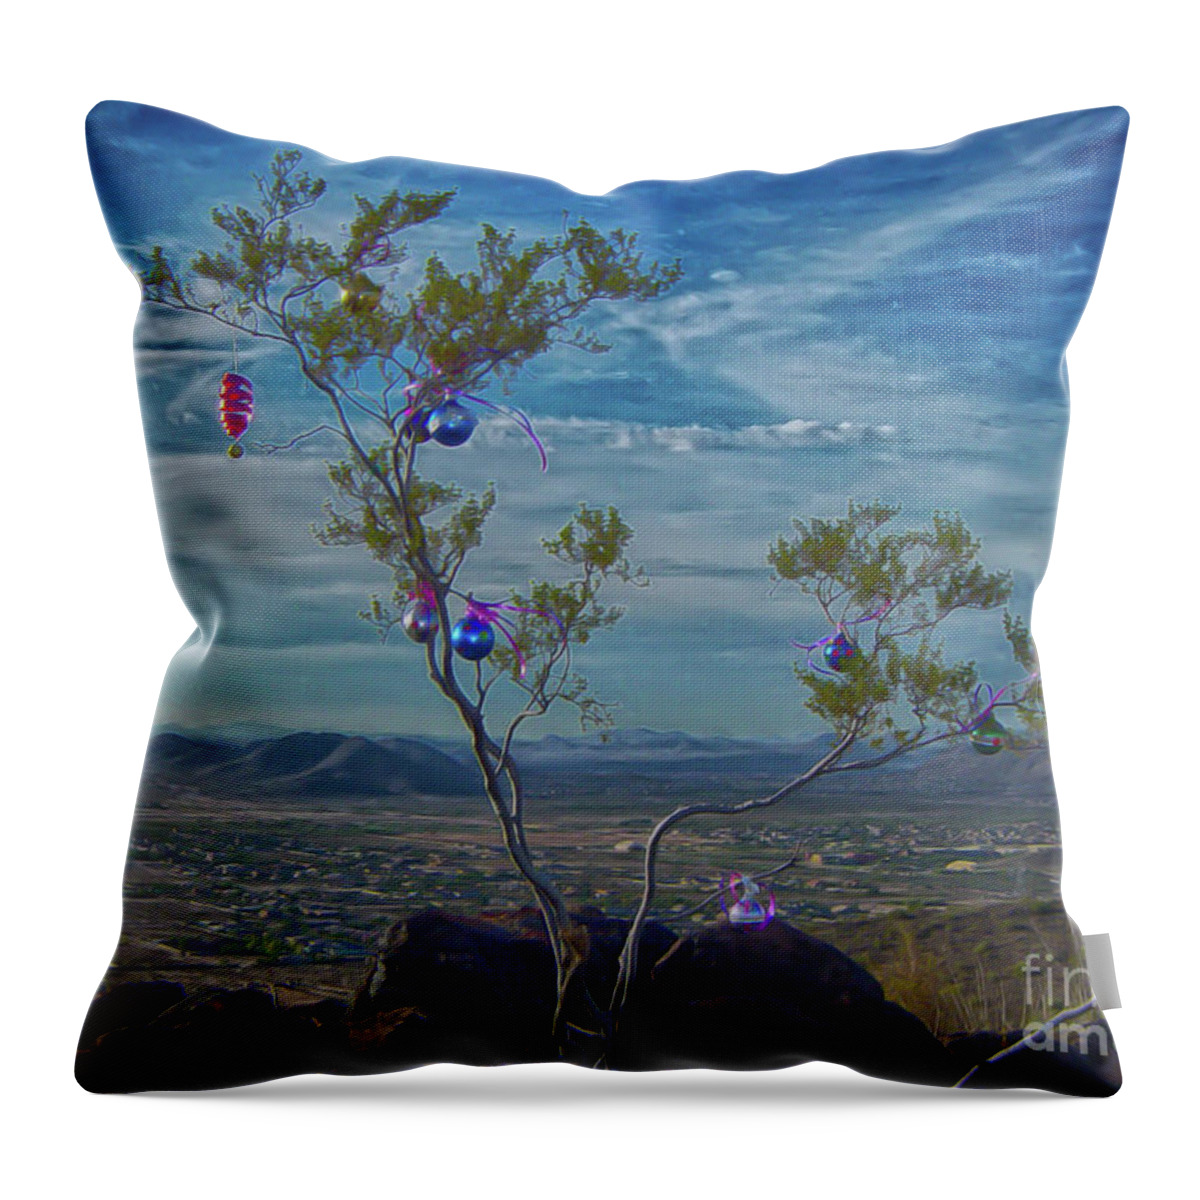 Arizona Throw Pillow featuring the photograph Sonoran Christmas by Eye Olating Images